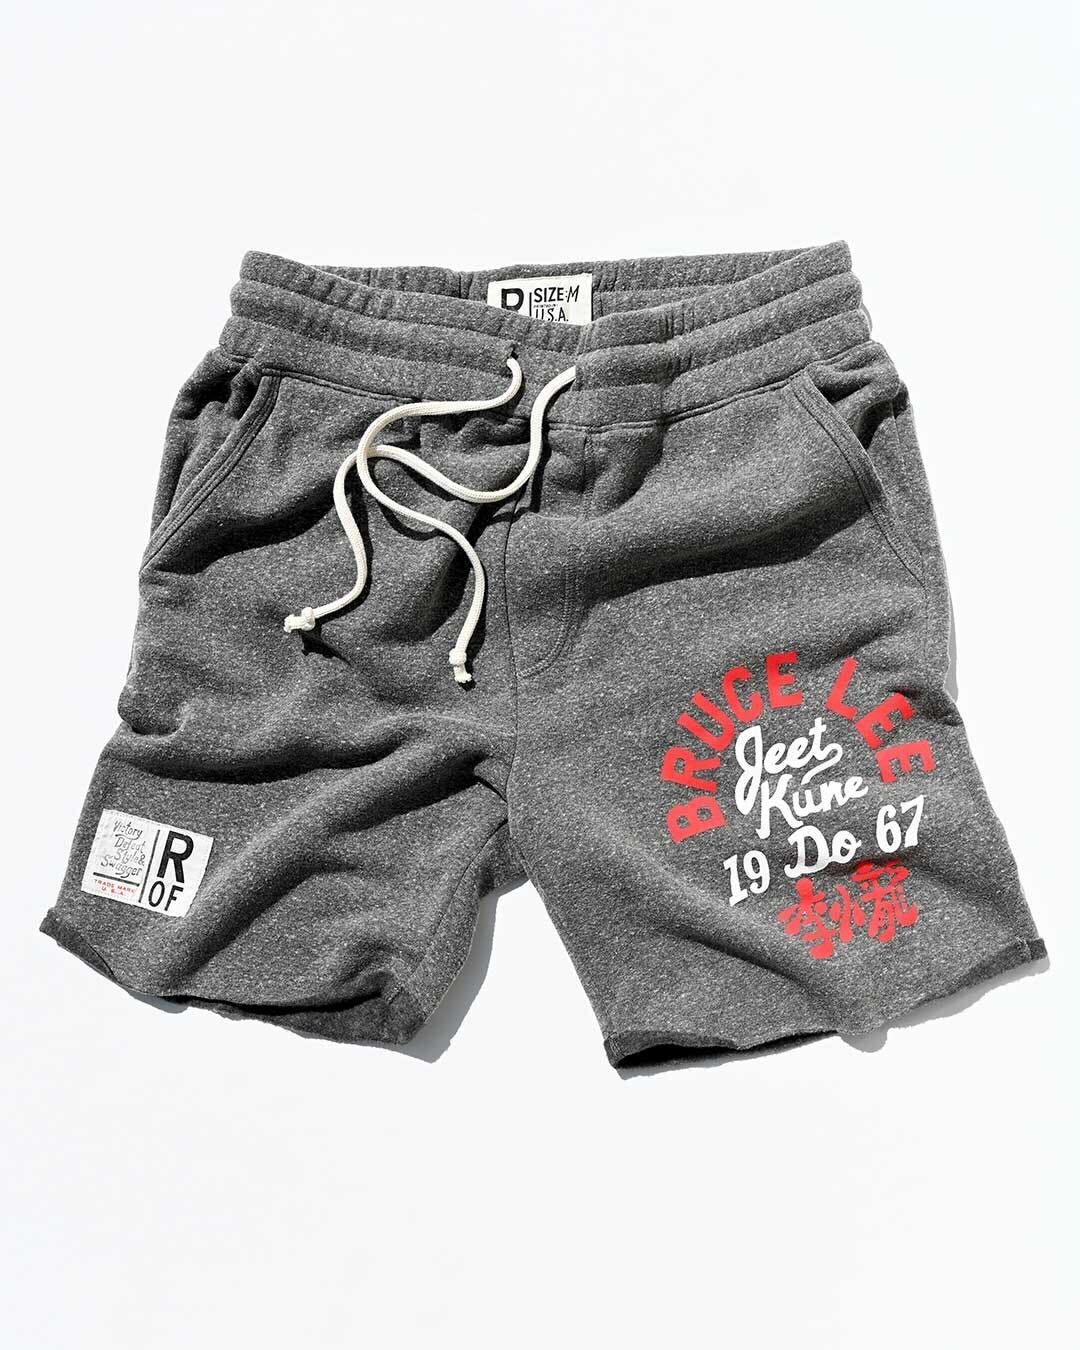 Bruce Lee JKD 1967 Grey Shorts - Roots of Fight Canada